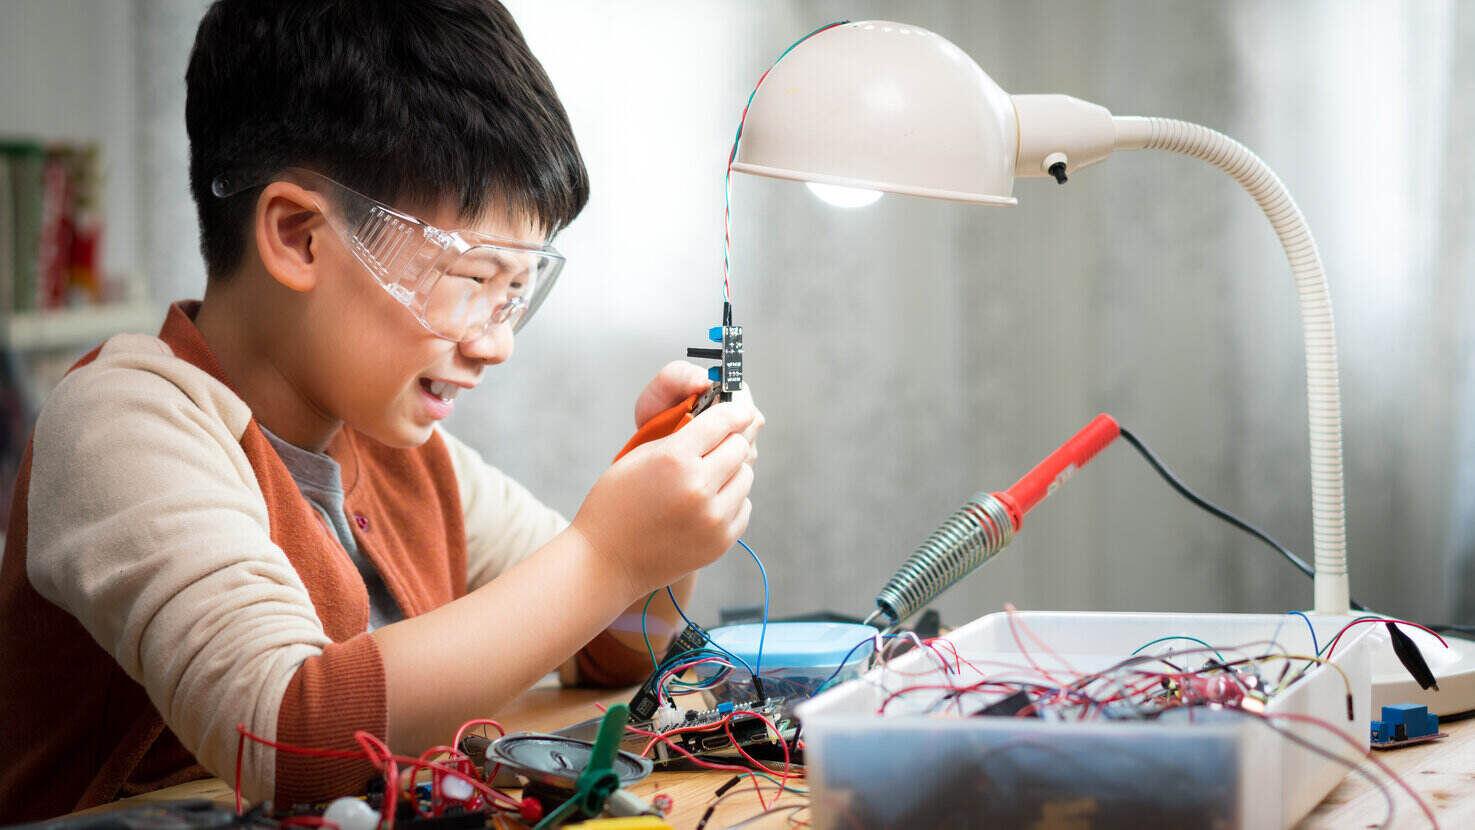 Student assembles circuits at table